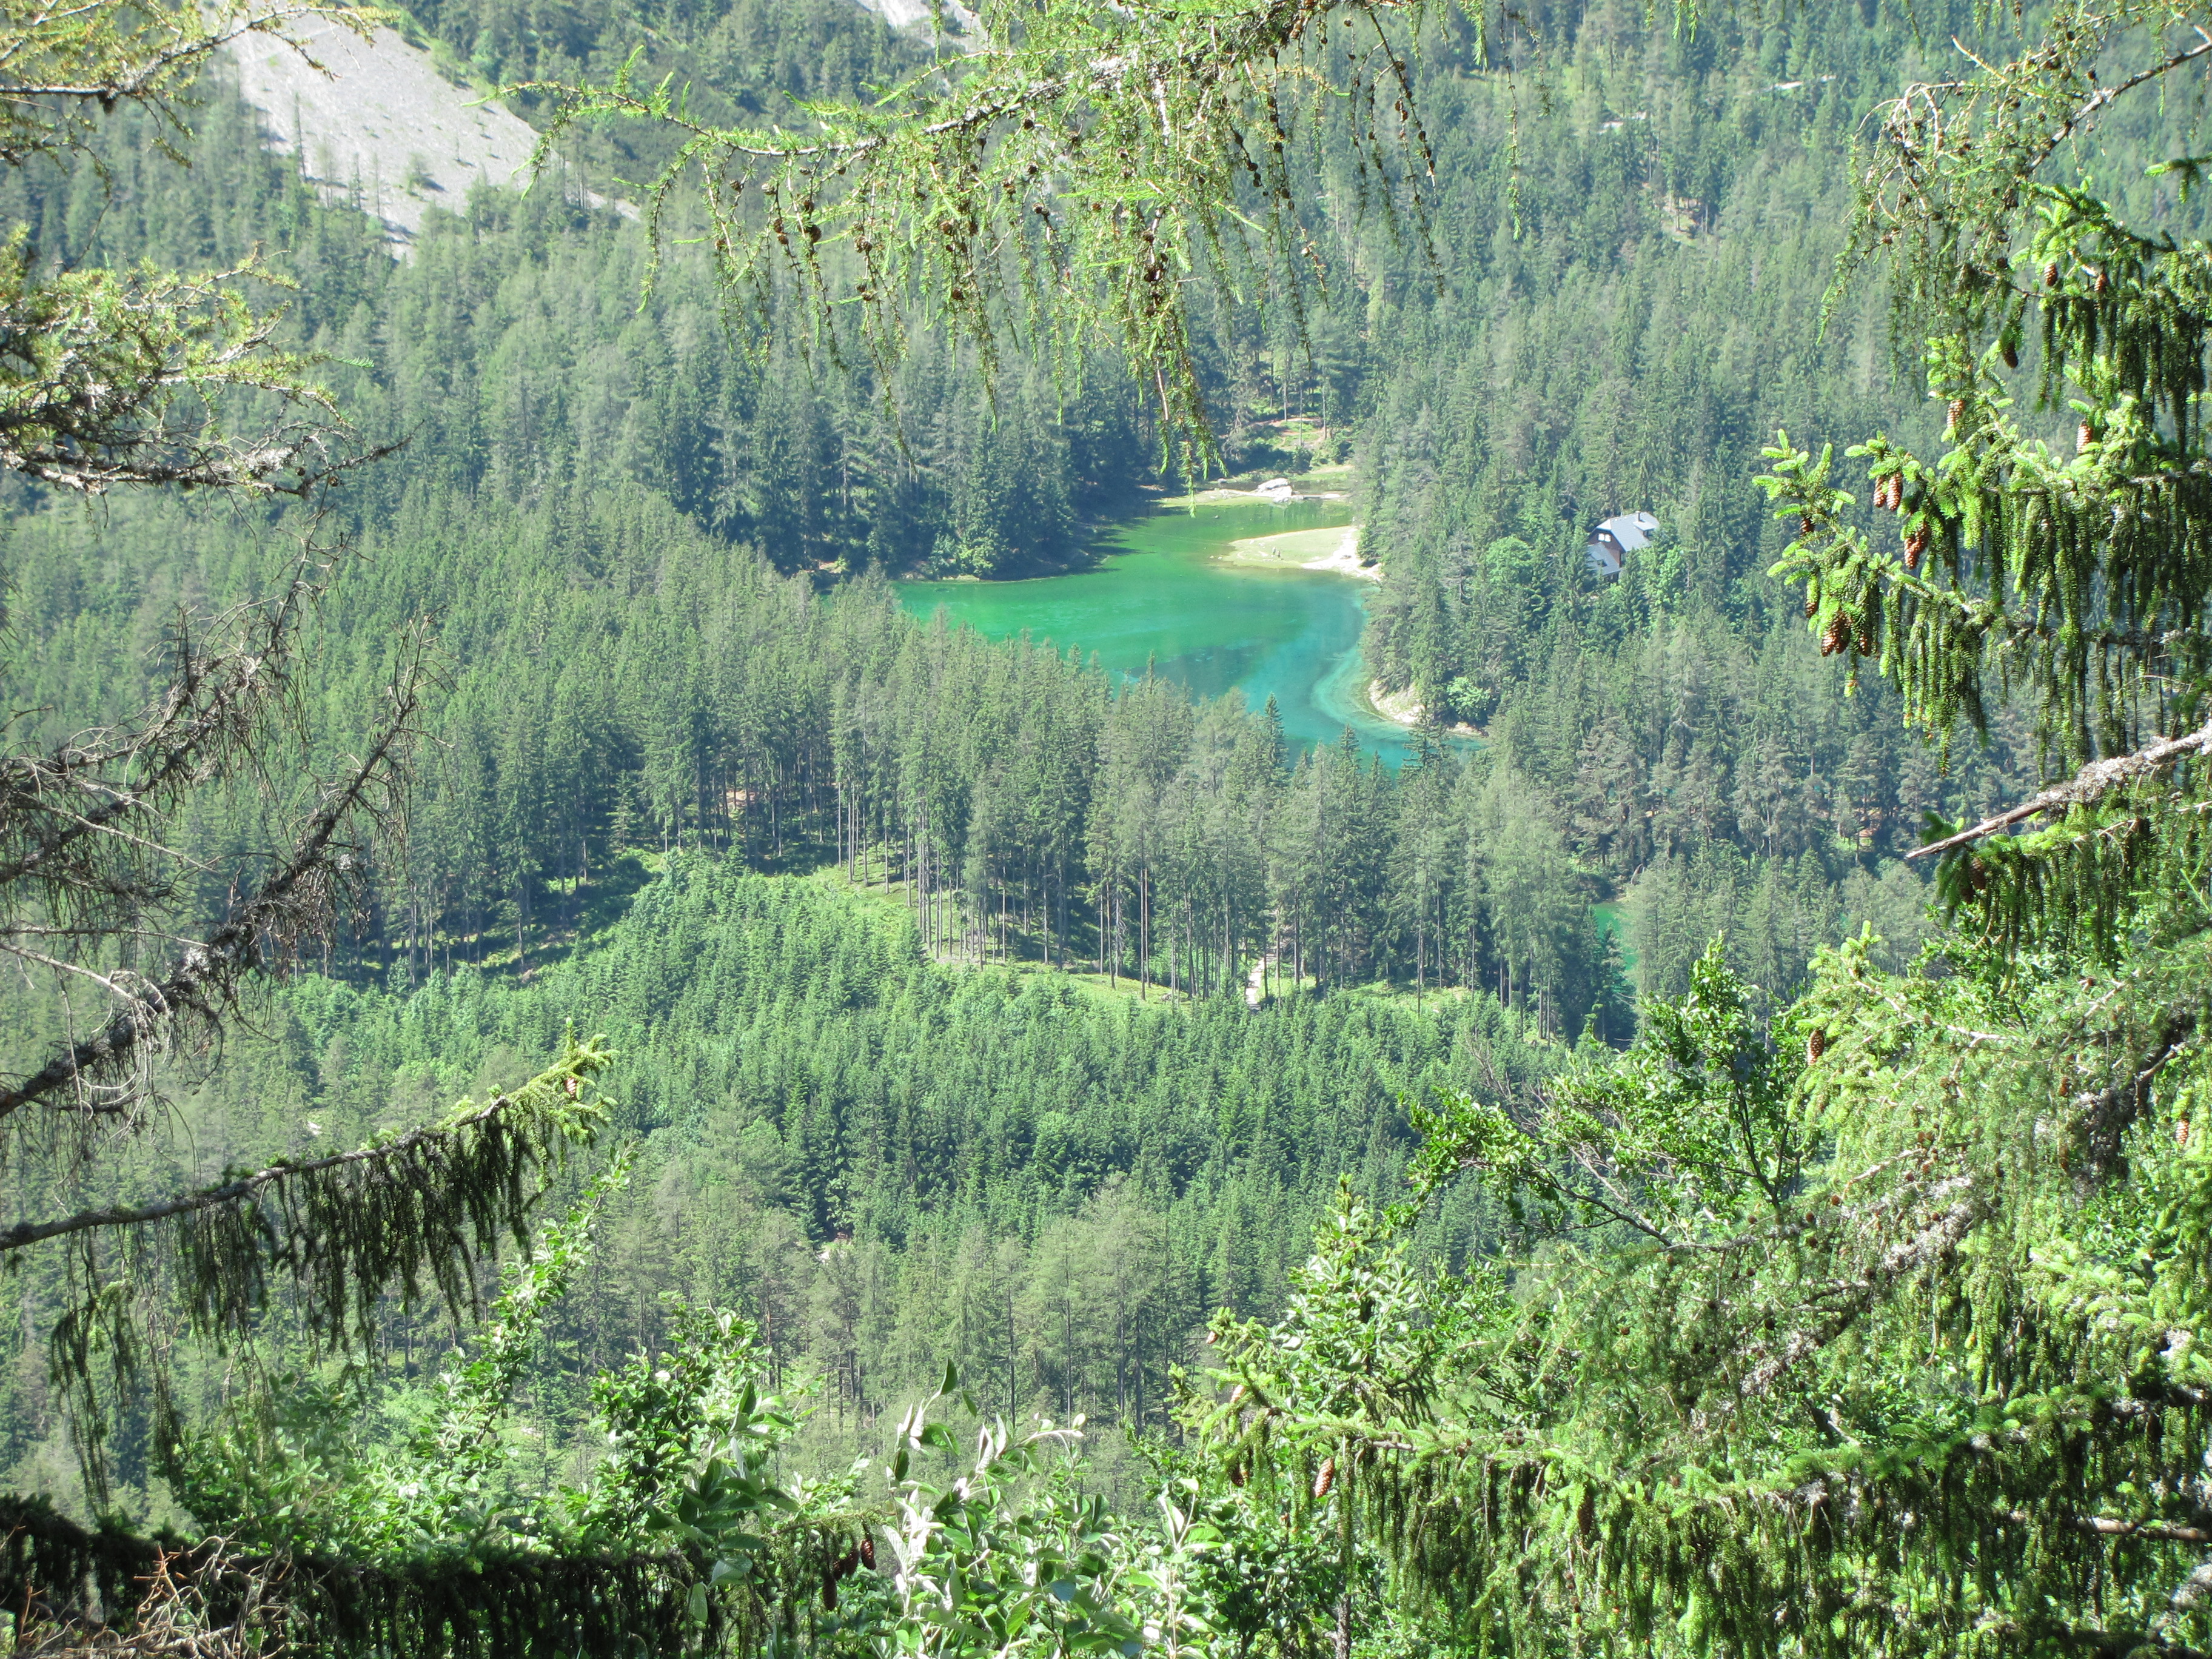 View point to the Green Lake on the Kamplsteig